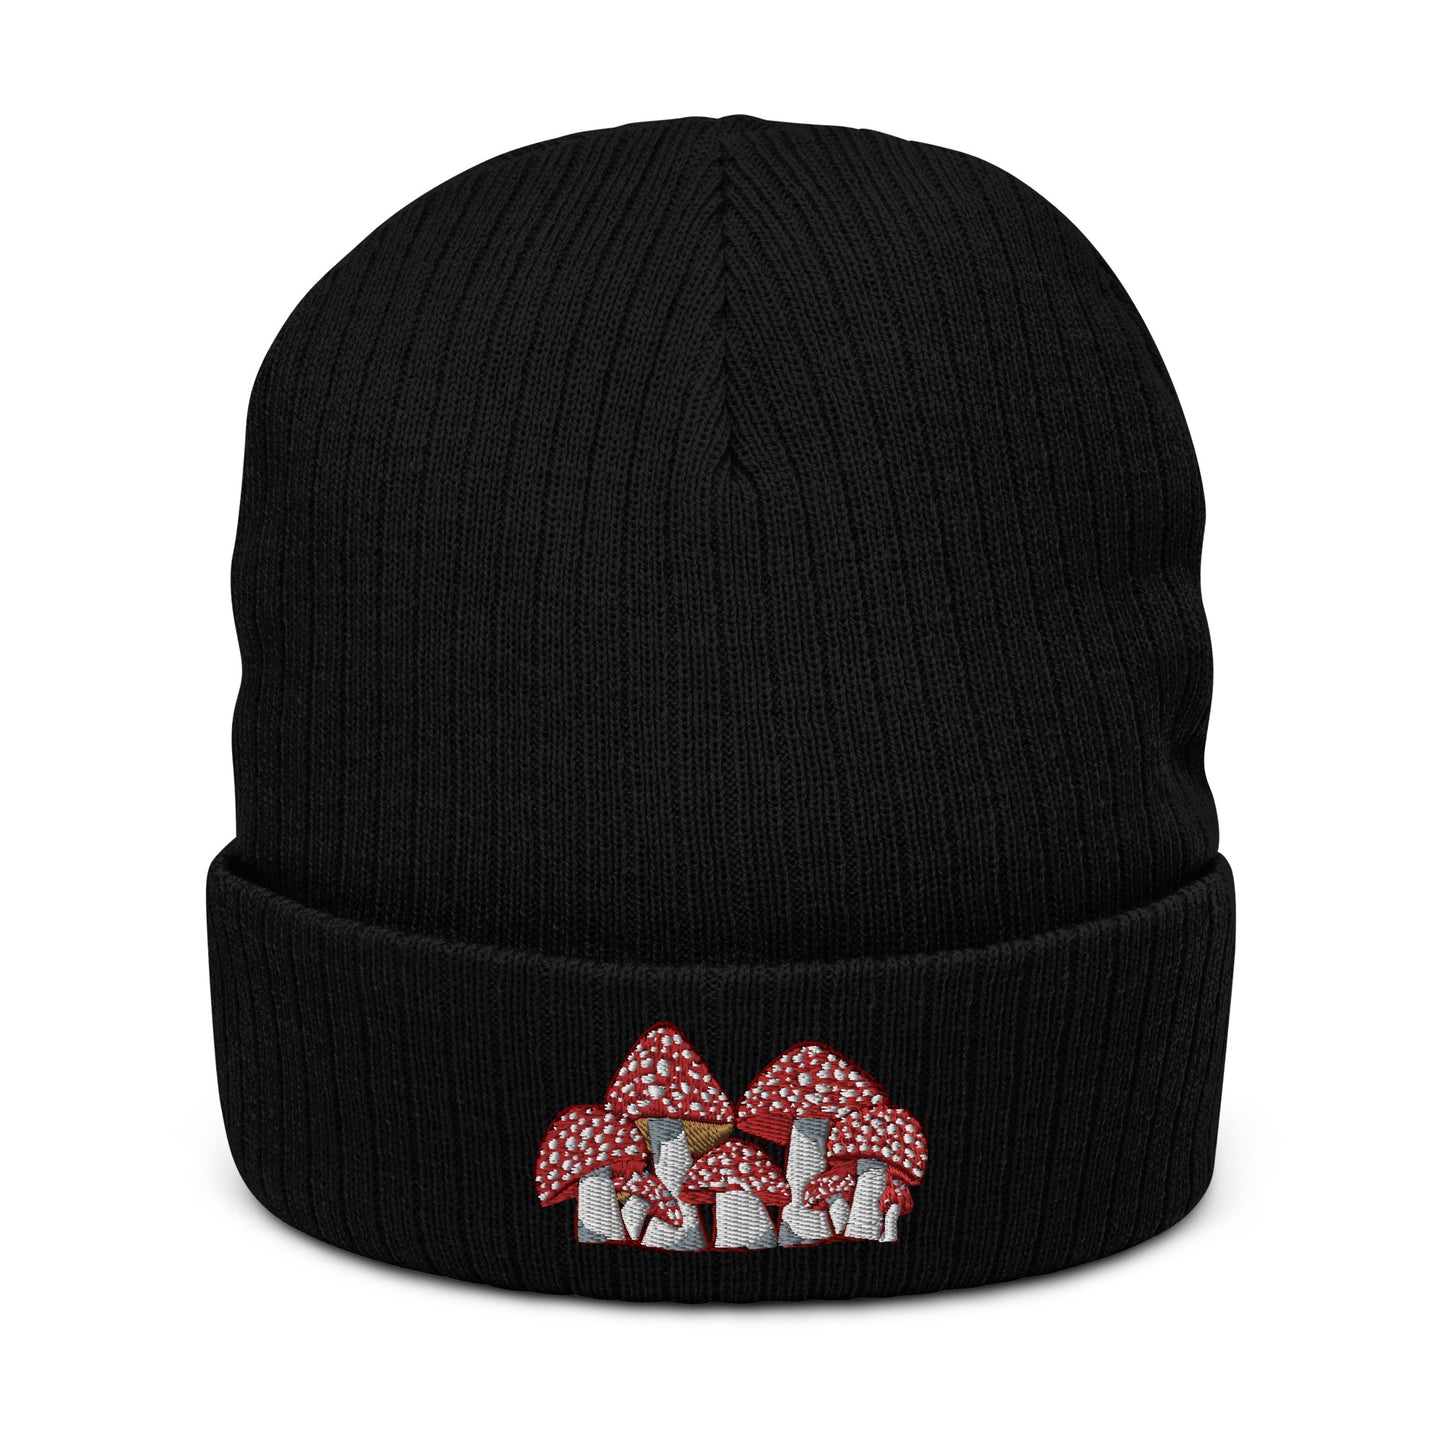 A black ribbed knit beanie has an embroidery of Fly Agaric mushrooms on the front.